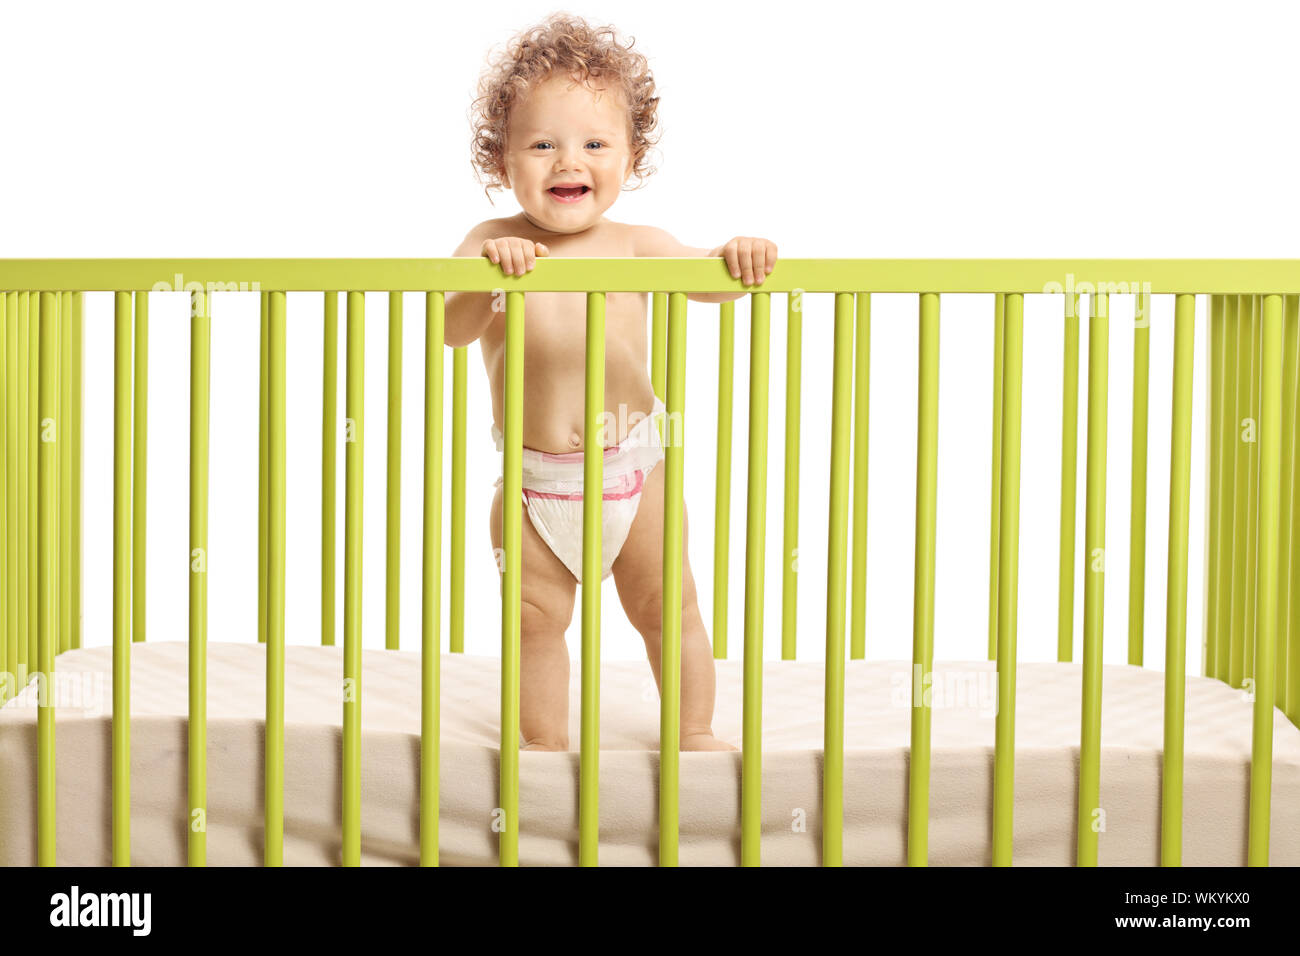 Smiling cute baby standing in a baby cot isolated on white background Stock Photo